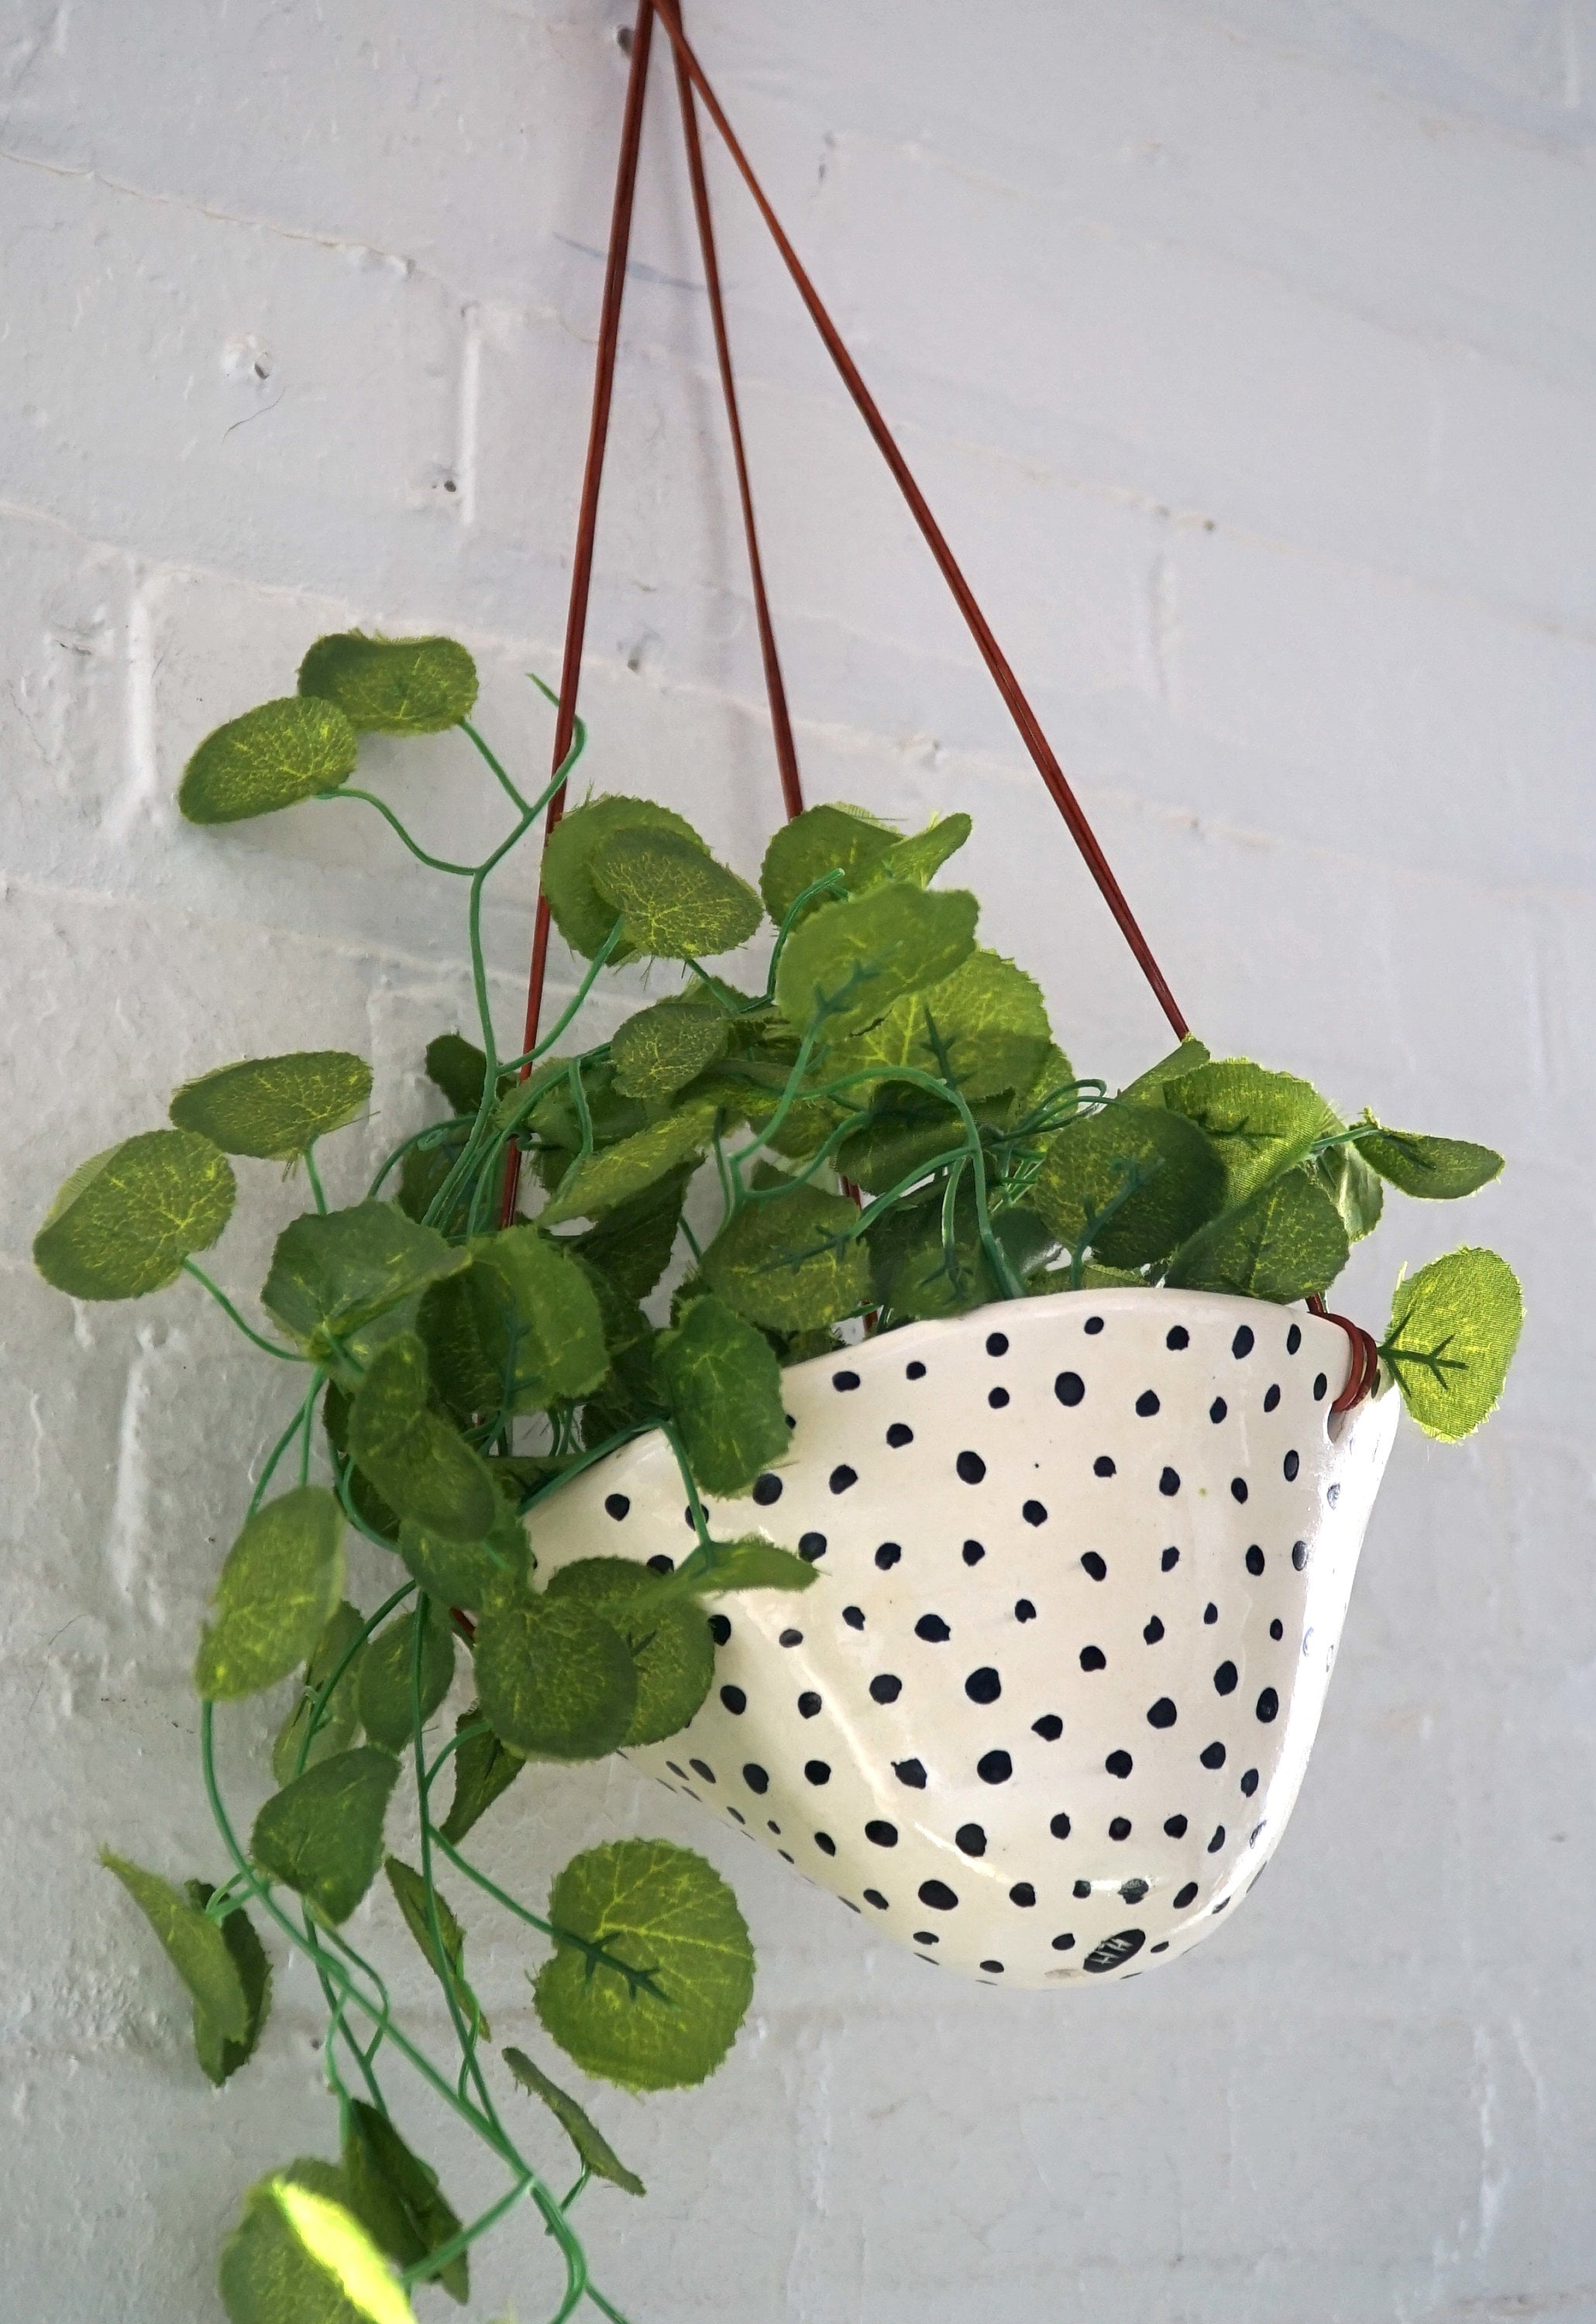 Black and White Glazed w/“Polka Dot” Design - Hanging Planter with Leather Cord - Classic Dotted Hanging Pot w/ Glossy Finish - Succulent Planter - Indoor Pot